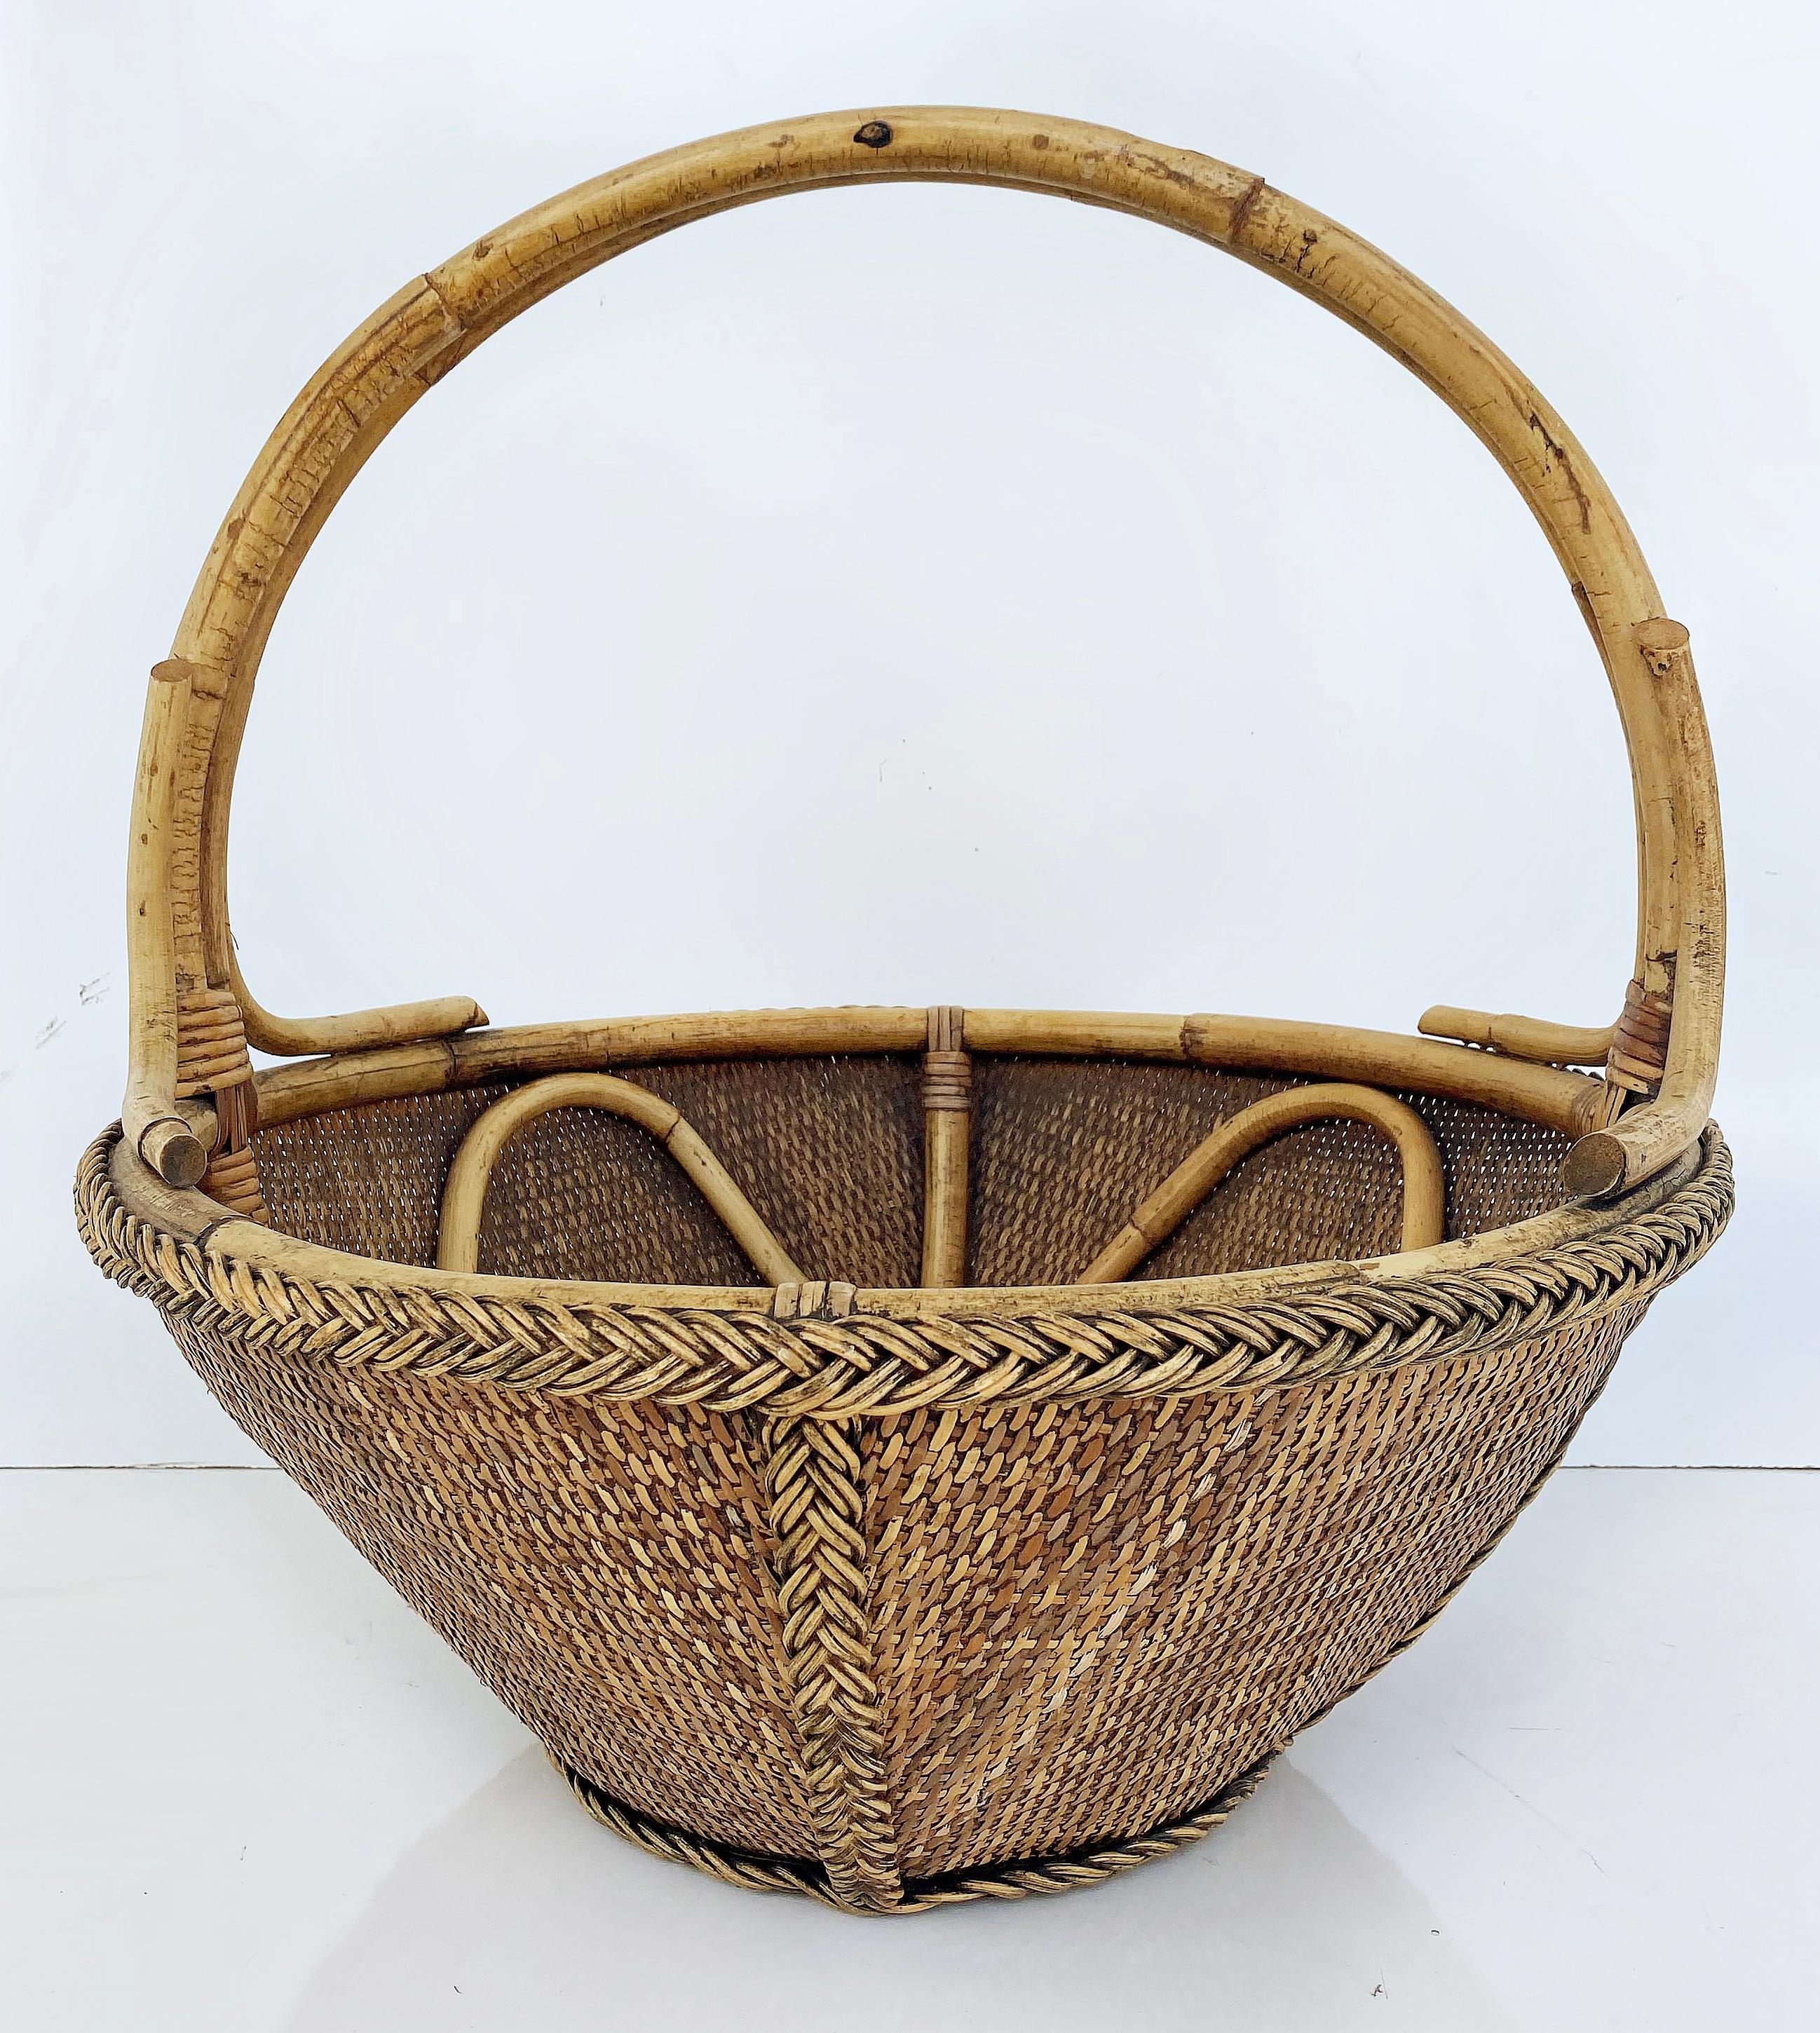 Hand-Woven Rattan and Reed Basket with Handle and Braided Border

Offered for sale is a hand-woven rattan and reed basket with a handle and braided borders and details.